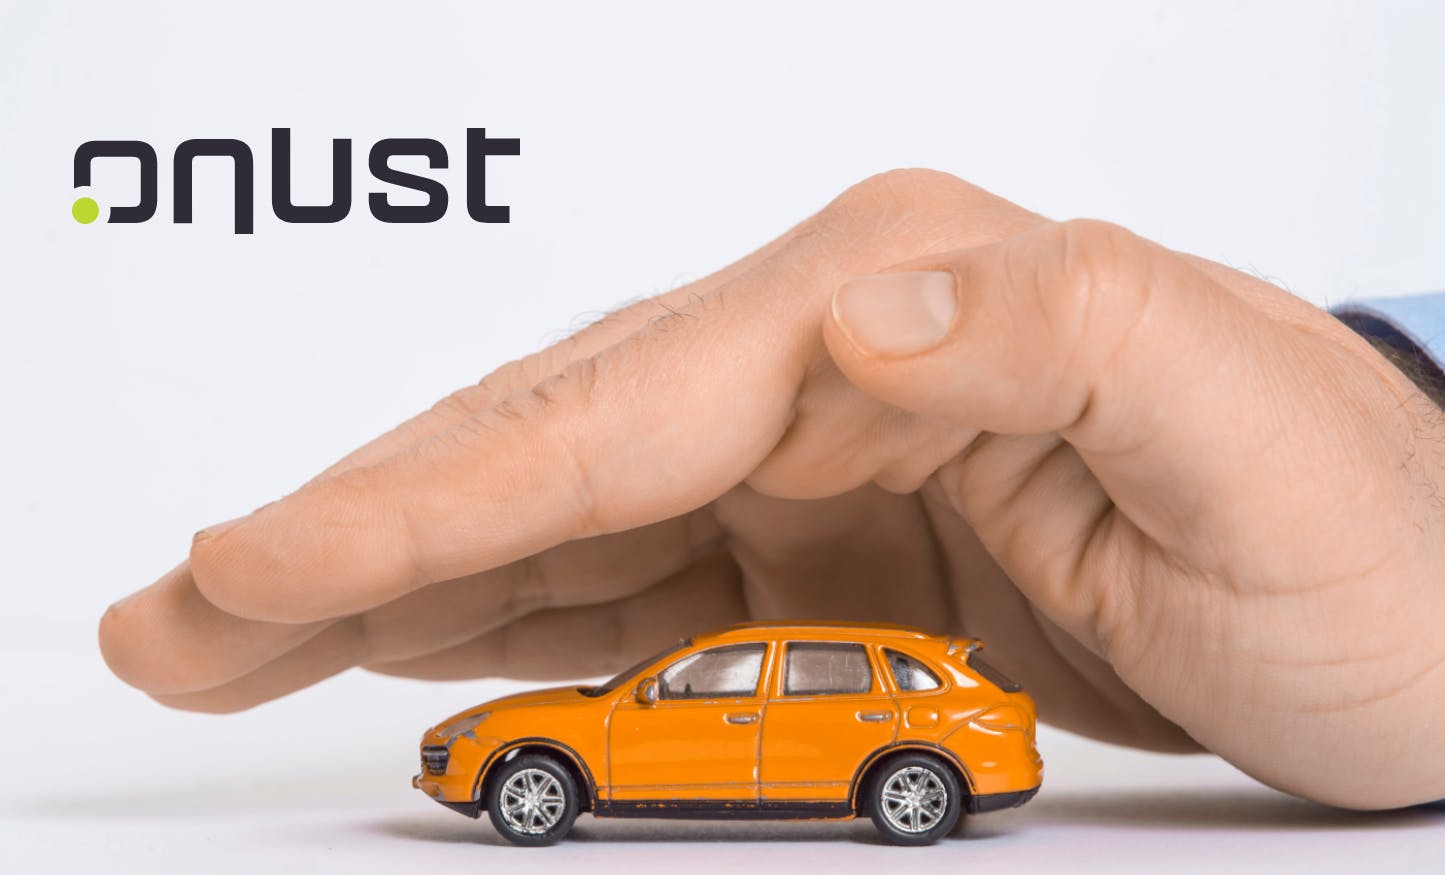 Onust Vehicle Coverage: A Full Review